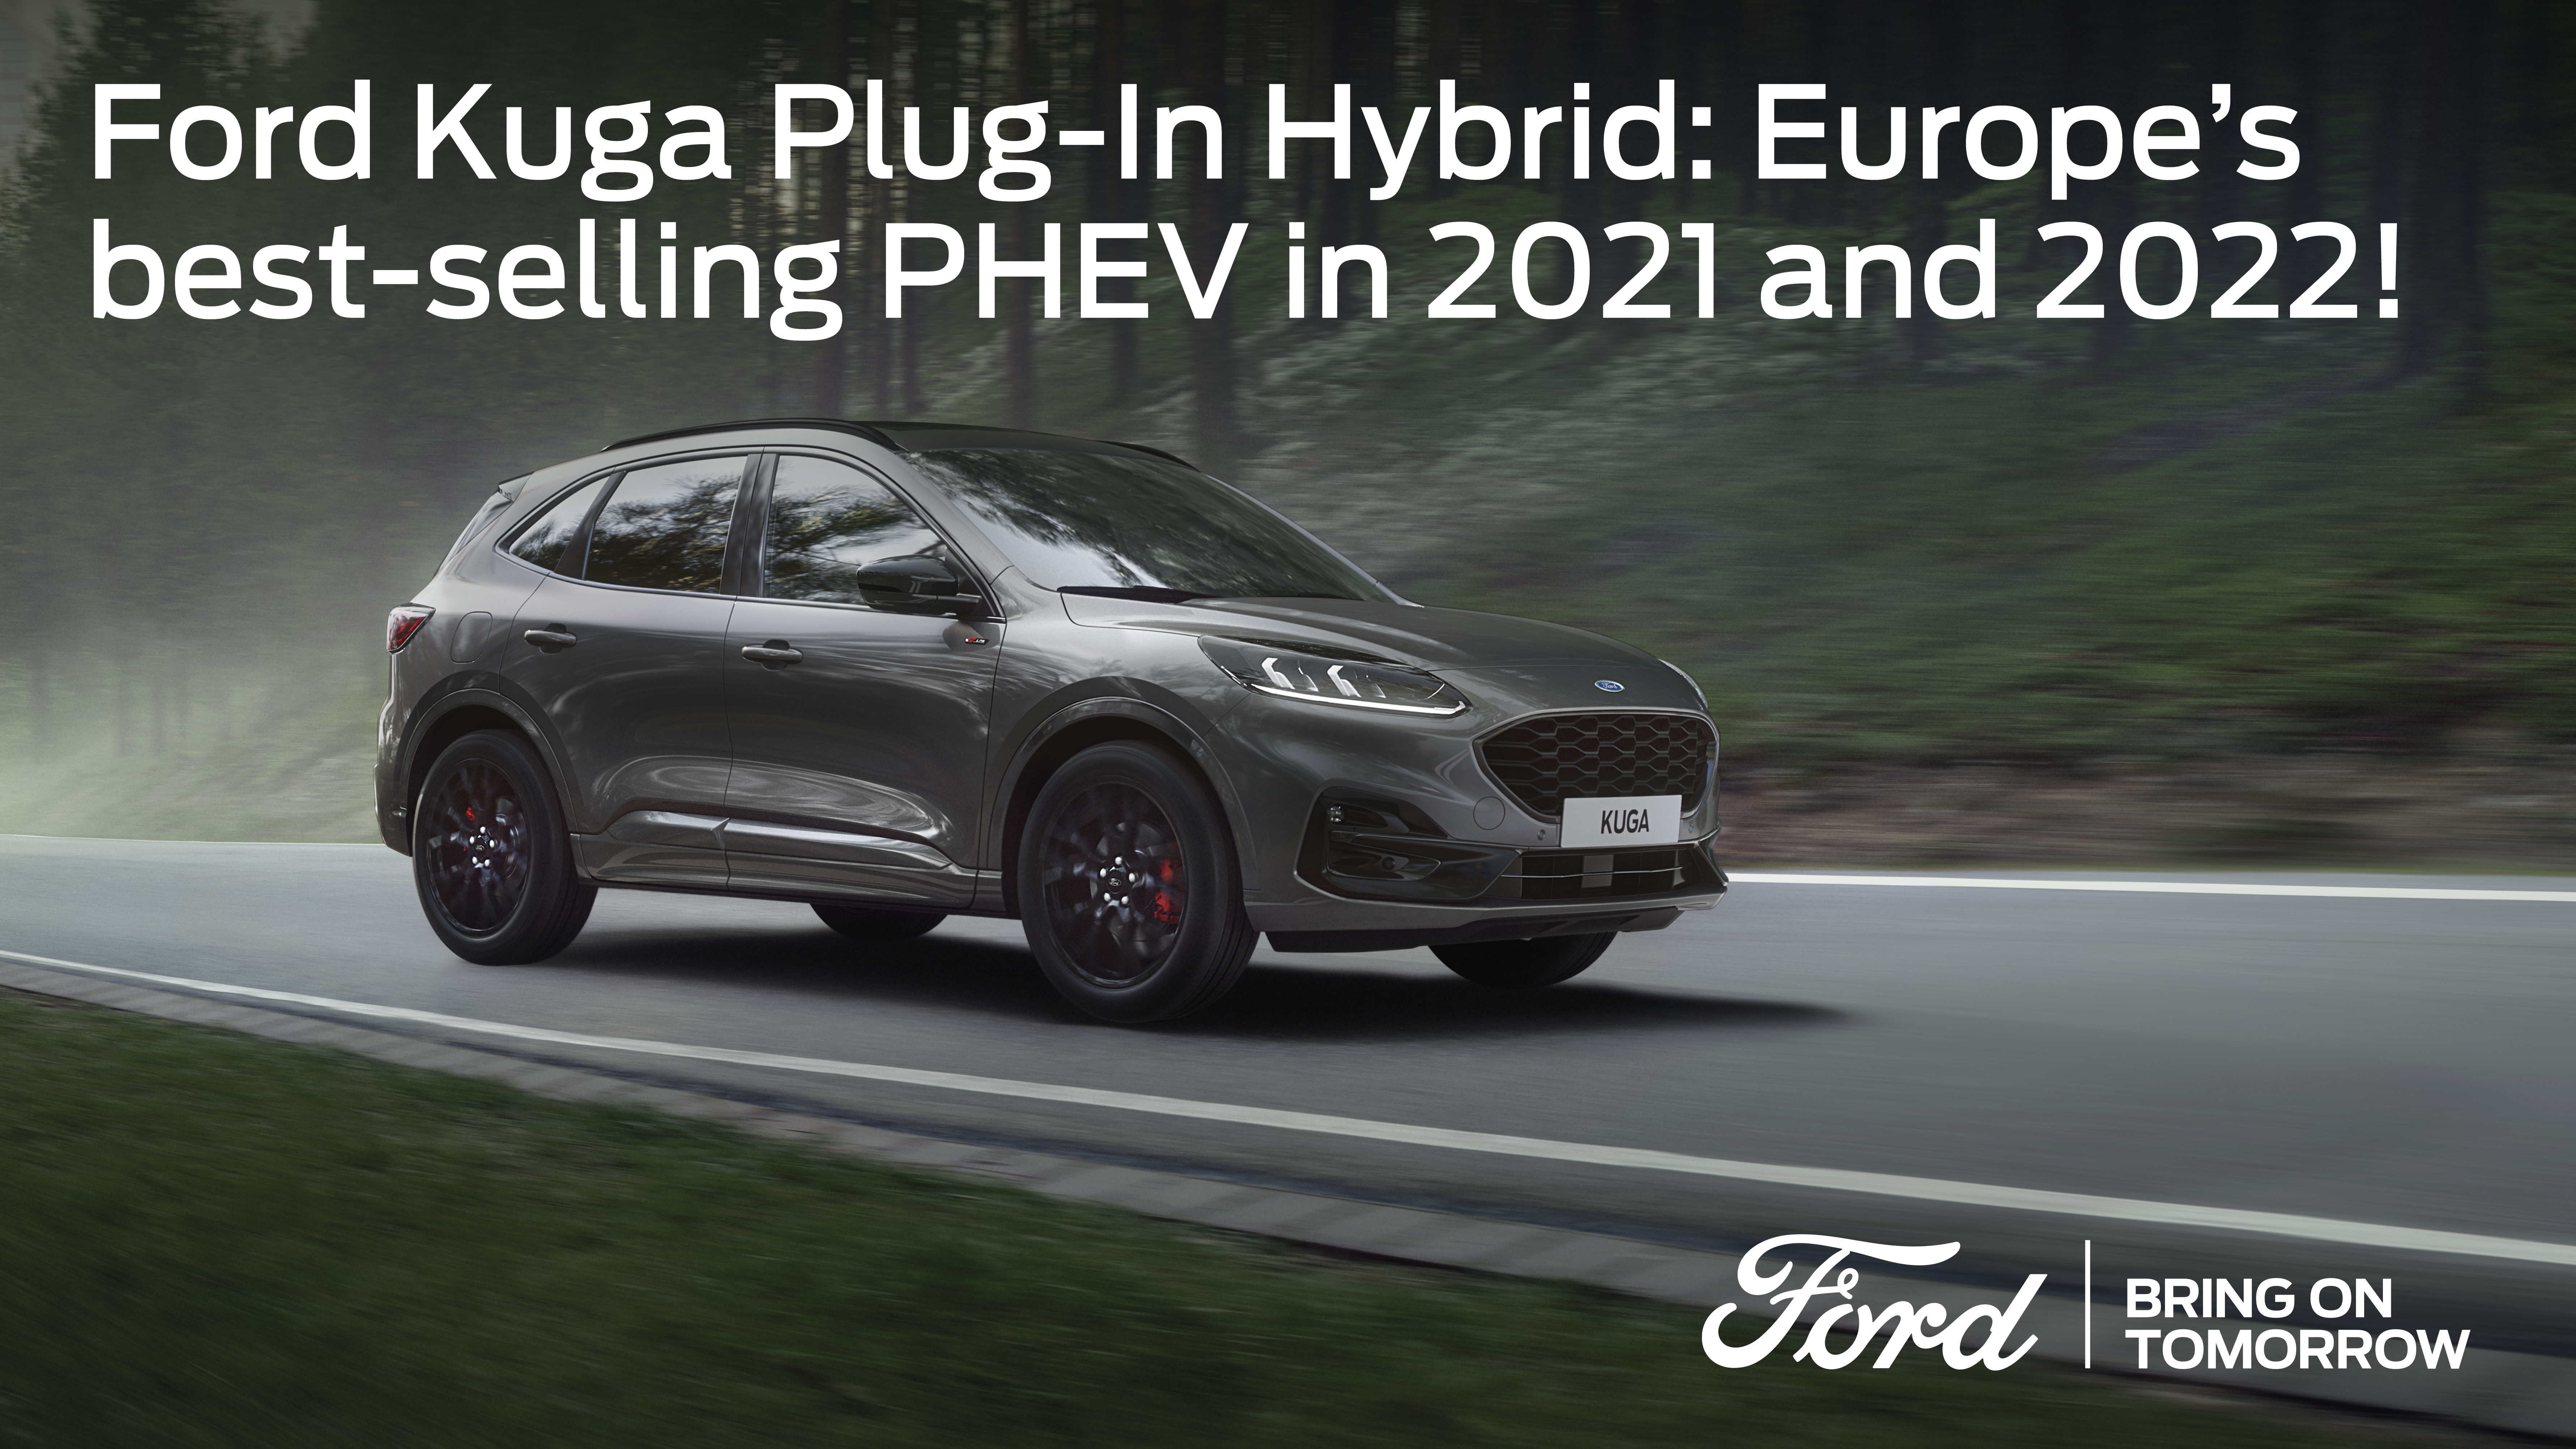 Ford Kuga Plug-In Hybrid is Europe's Best-Selling PHEV for a